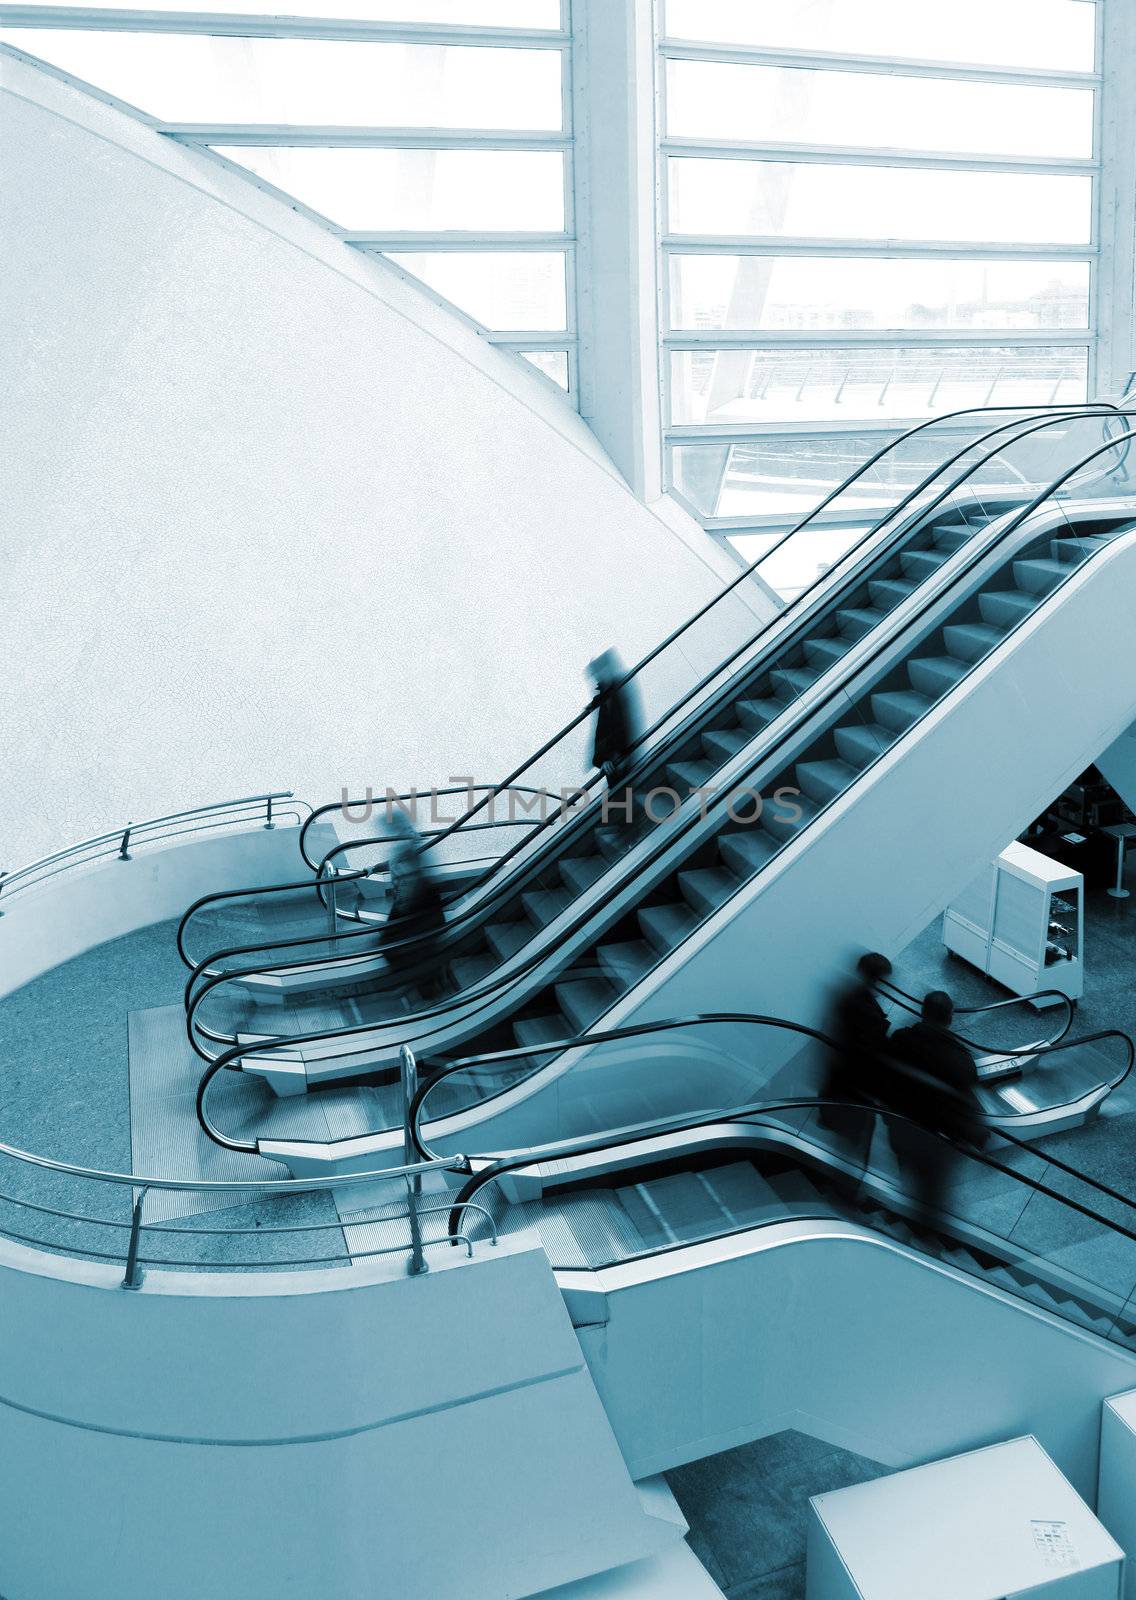 Architectural detail of escalator and people